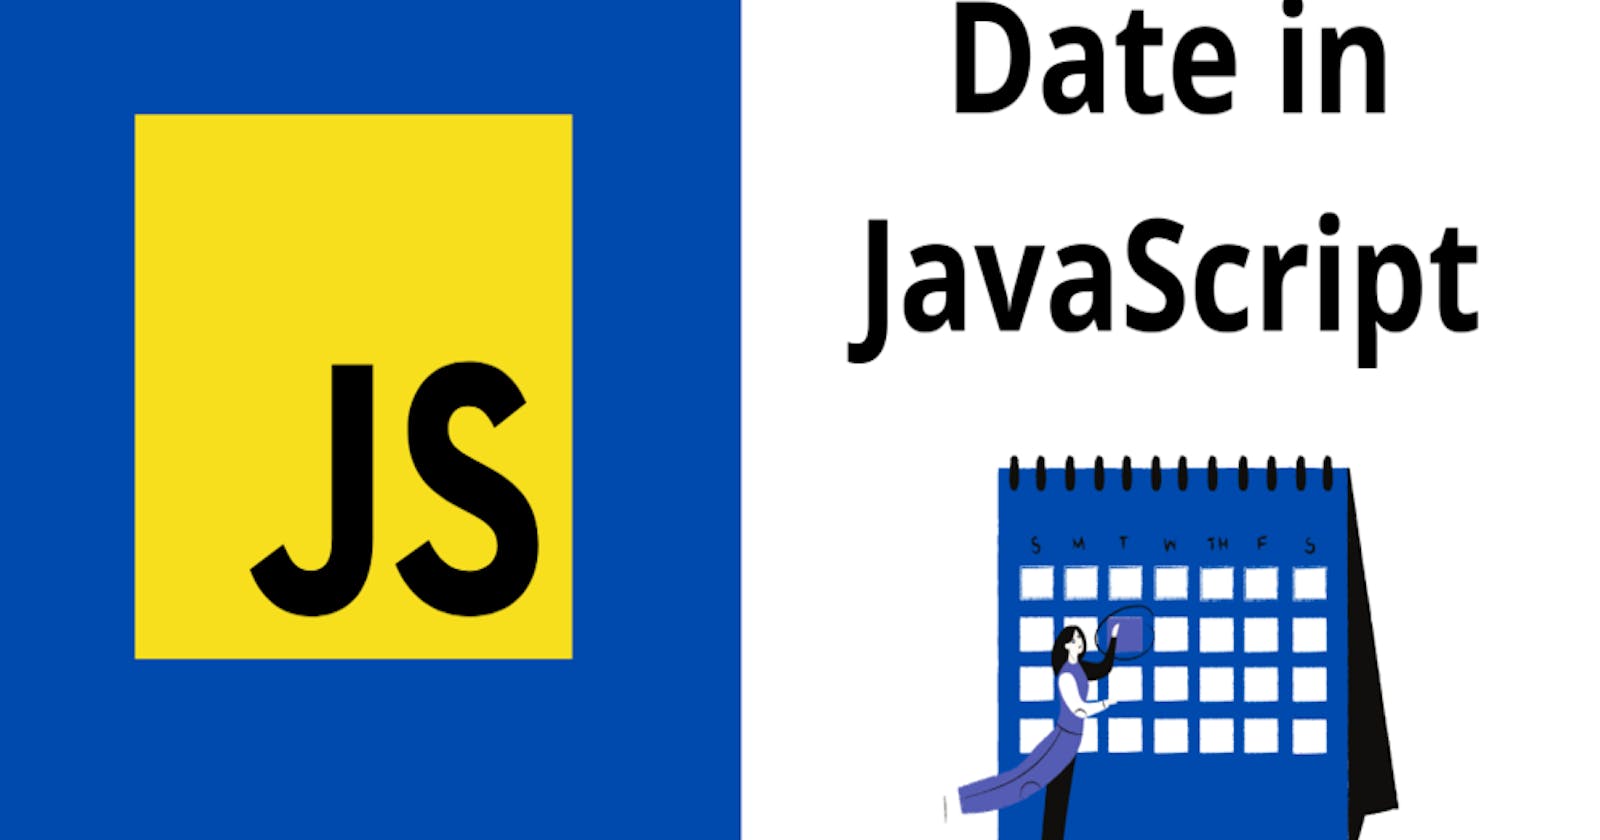 [JavaScript] Date Object Methods & Usage in Real Life - Explained with Examples.